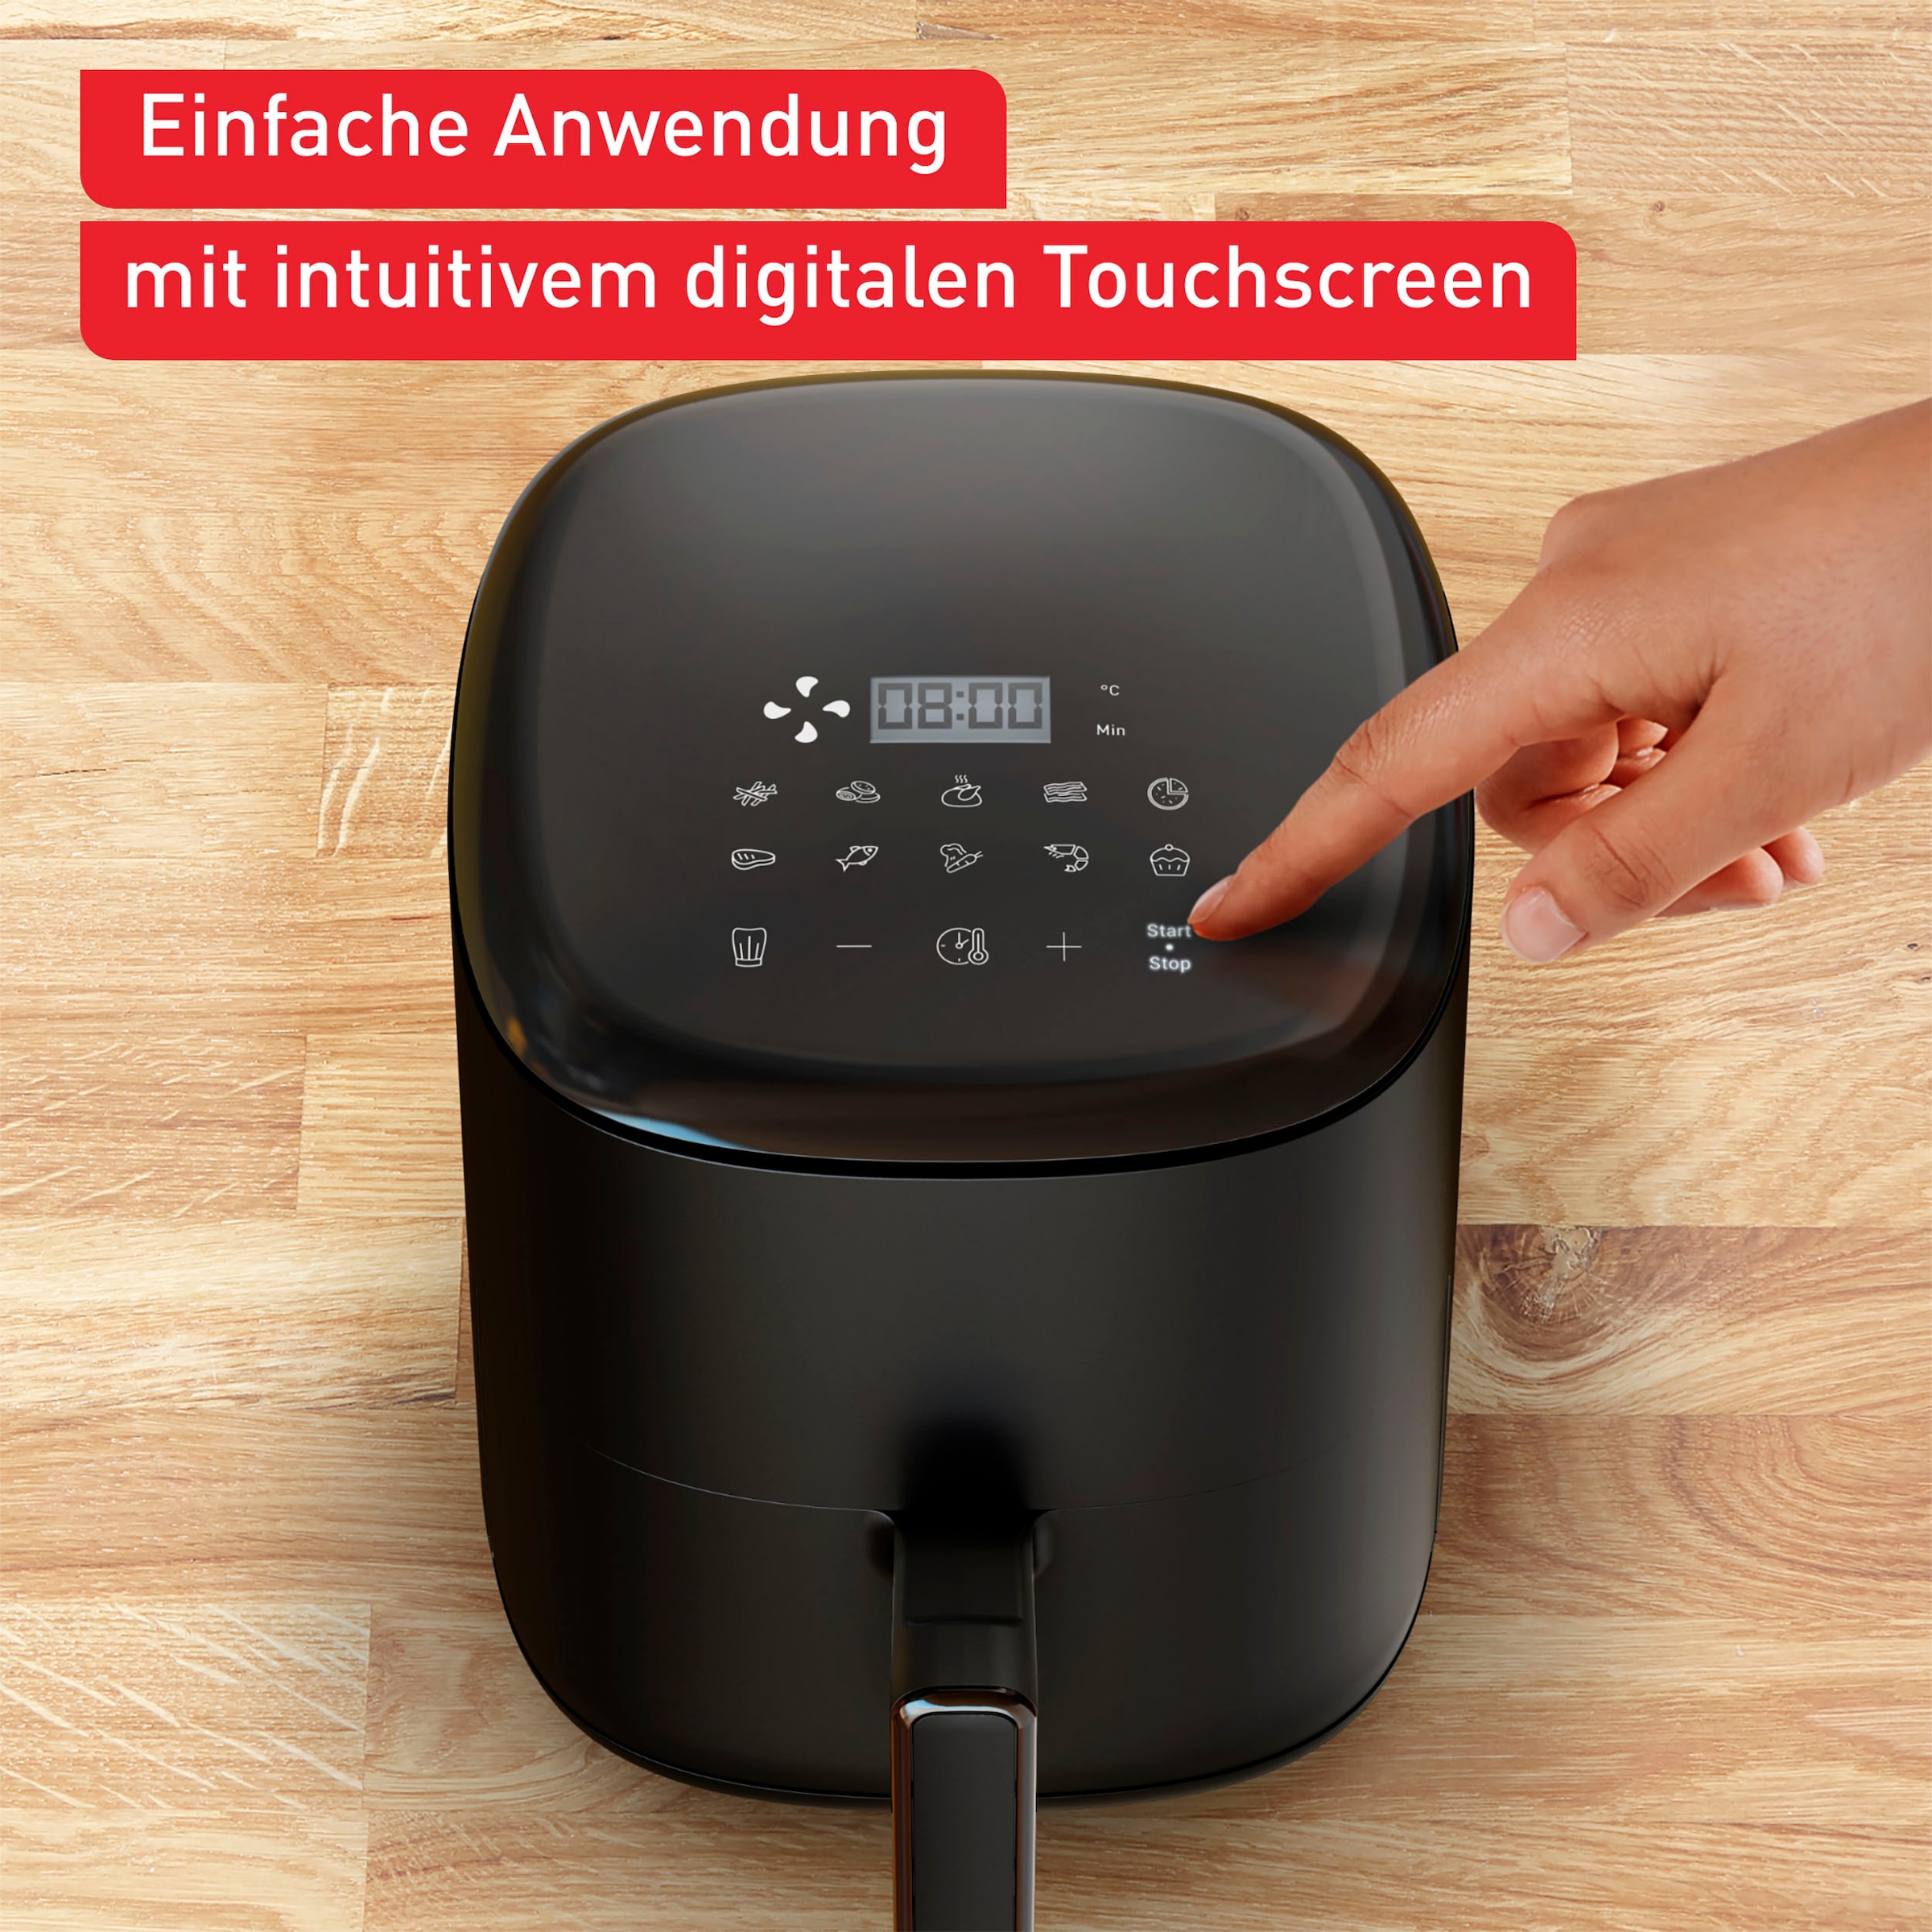 Tefal Heißluftfritteuse 1300 Easy Fry »EY1458 im Online Shop W OTTO Compact«